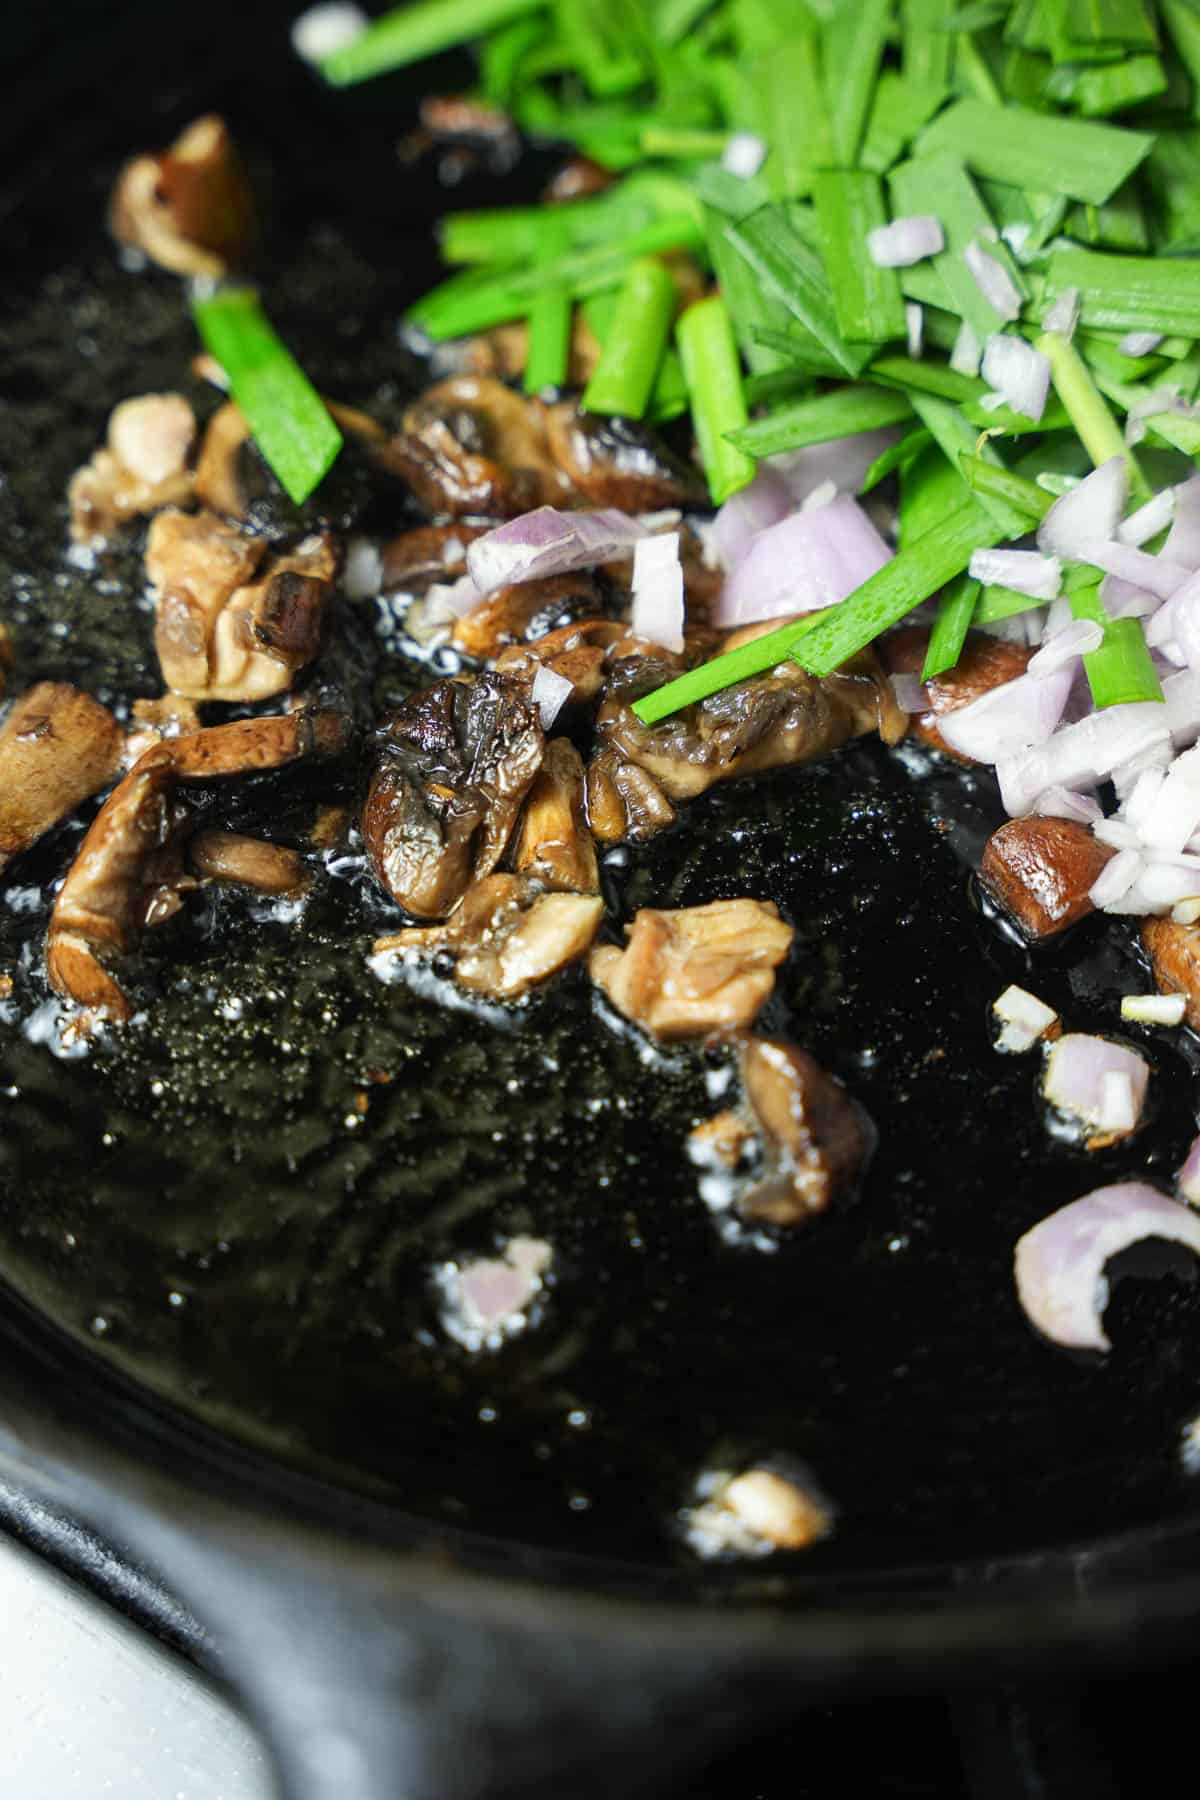 Shallots and chives are added to the cooking mushrooms.